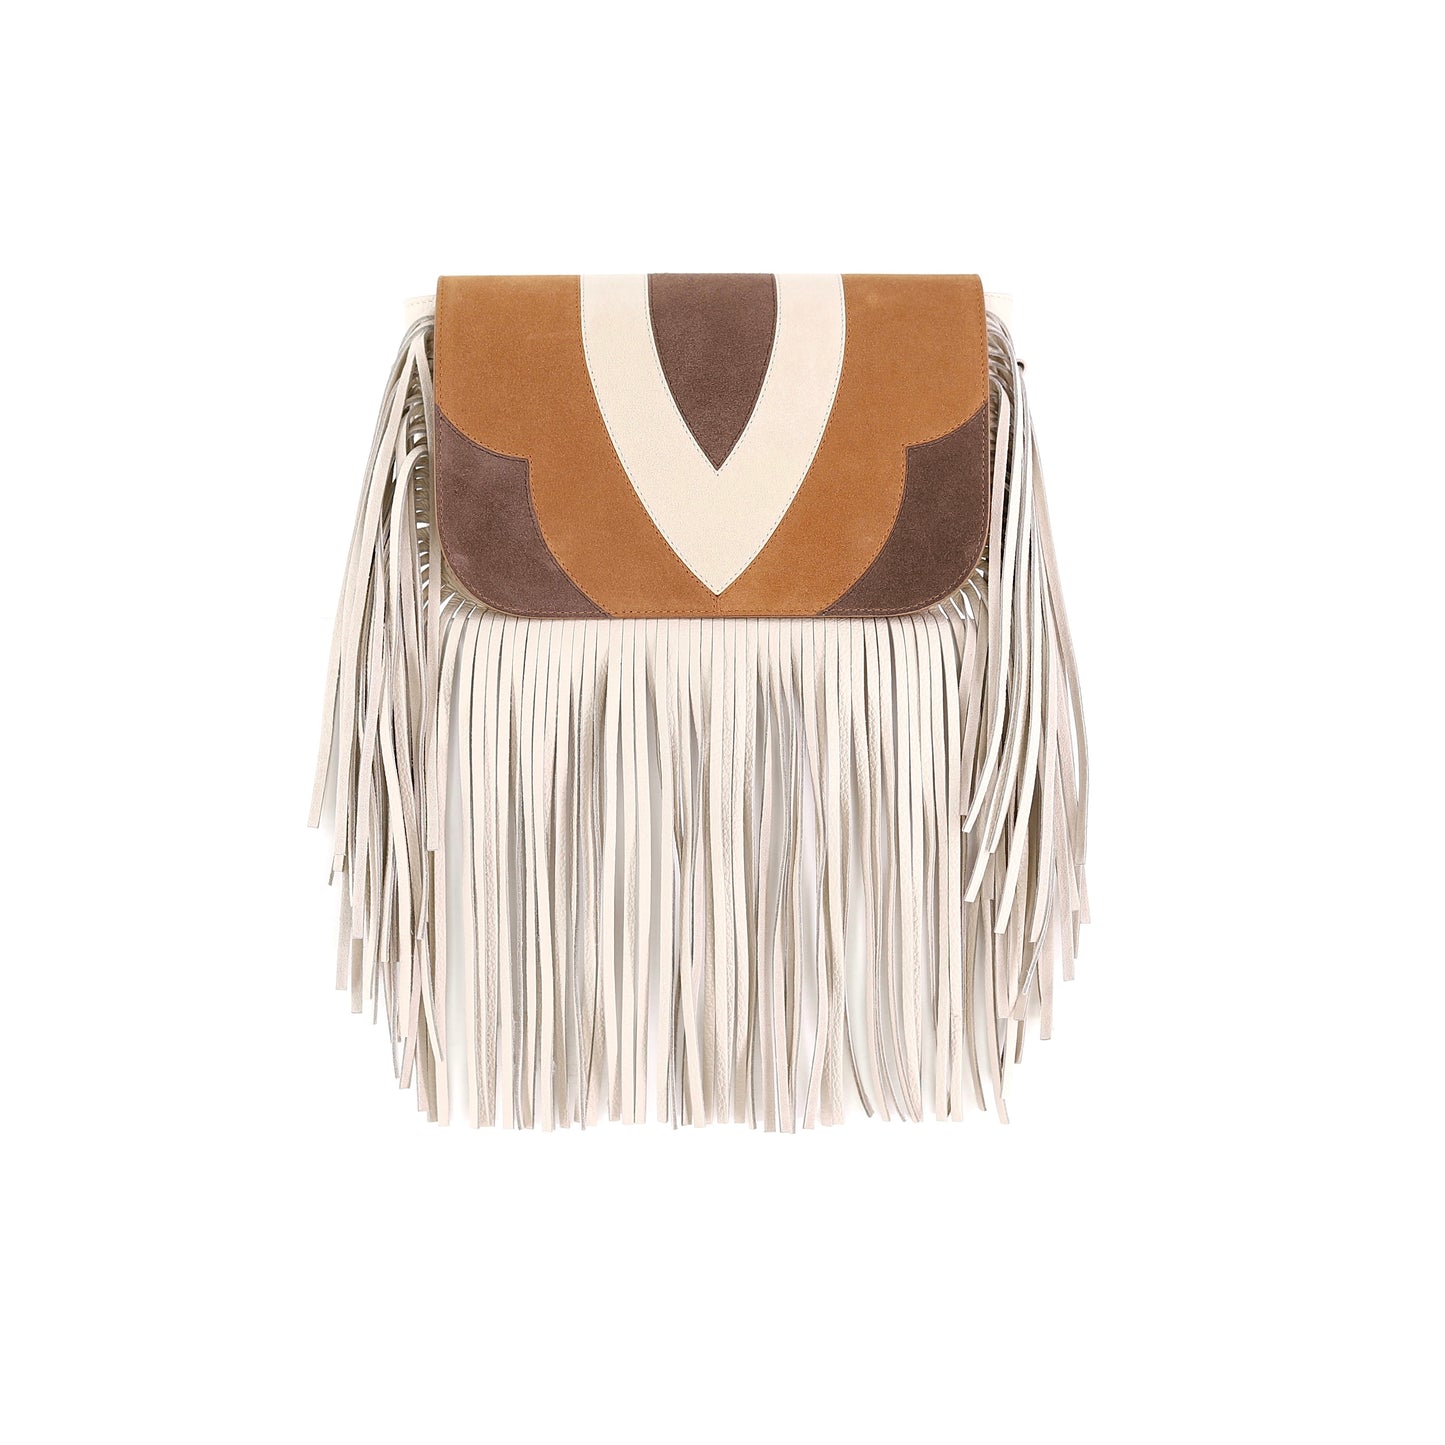 FREE SPIRIT flap suede leather caramel small